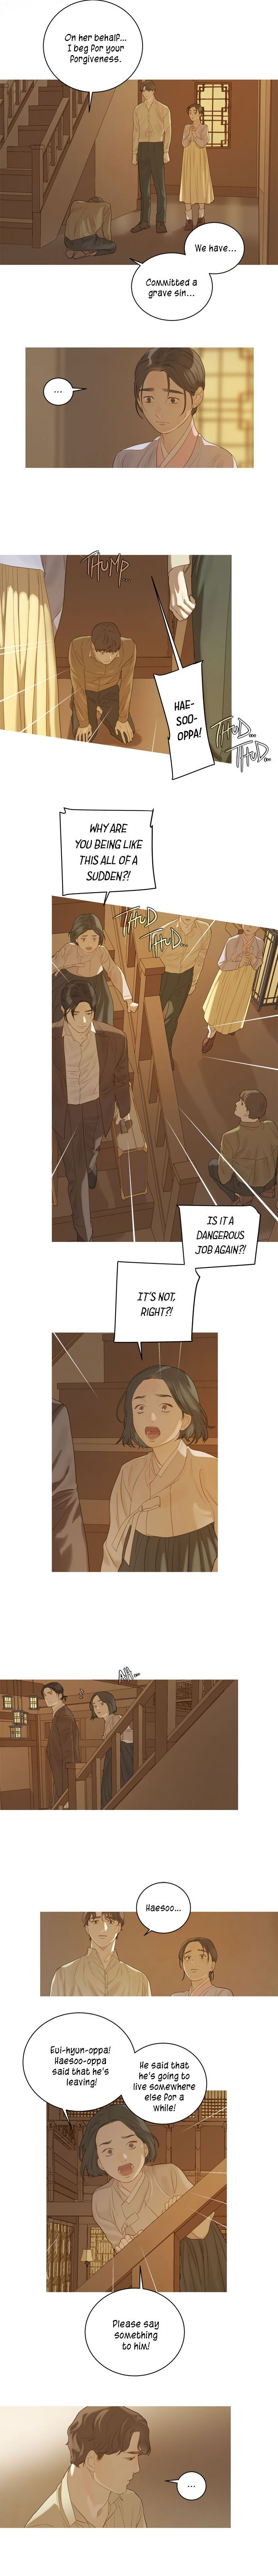 Gorae Byul - The Gyeongseong Mermaid - Chapter 26 Page 6